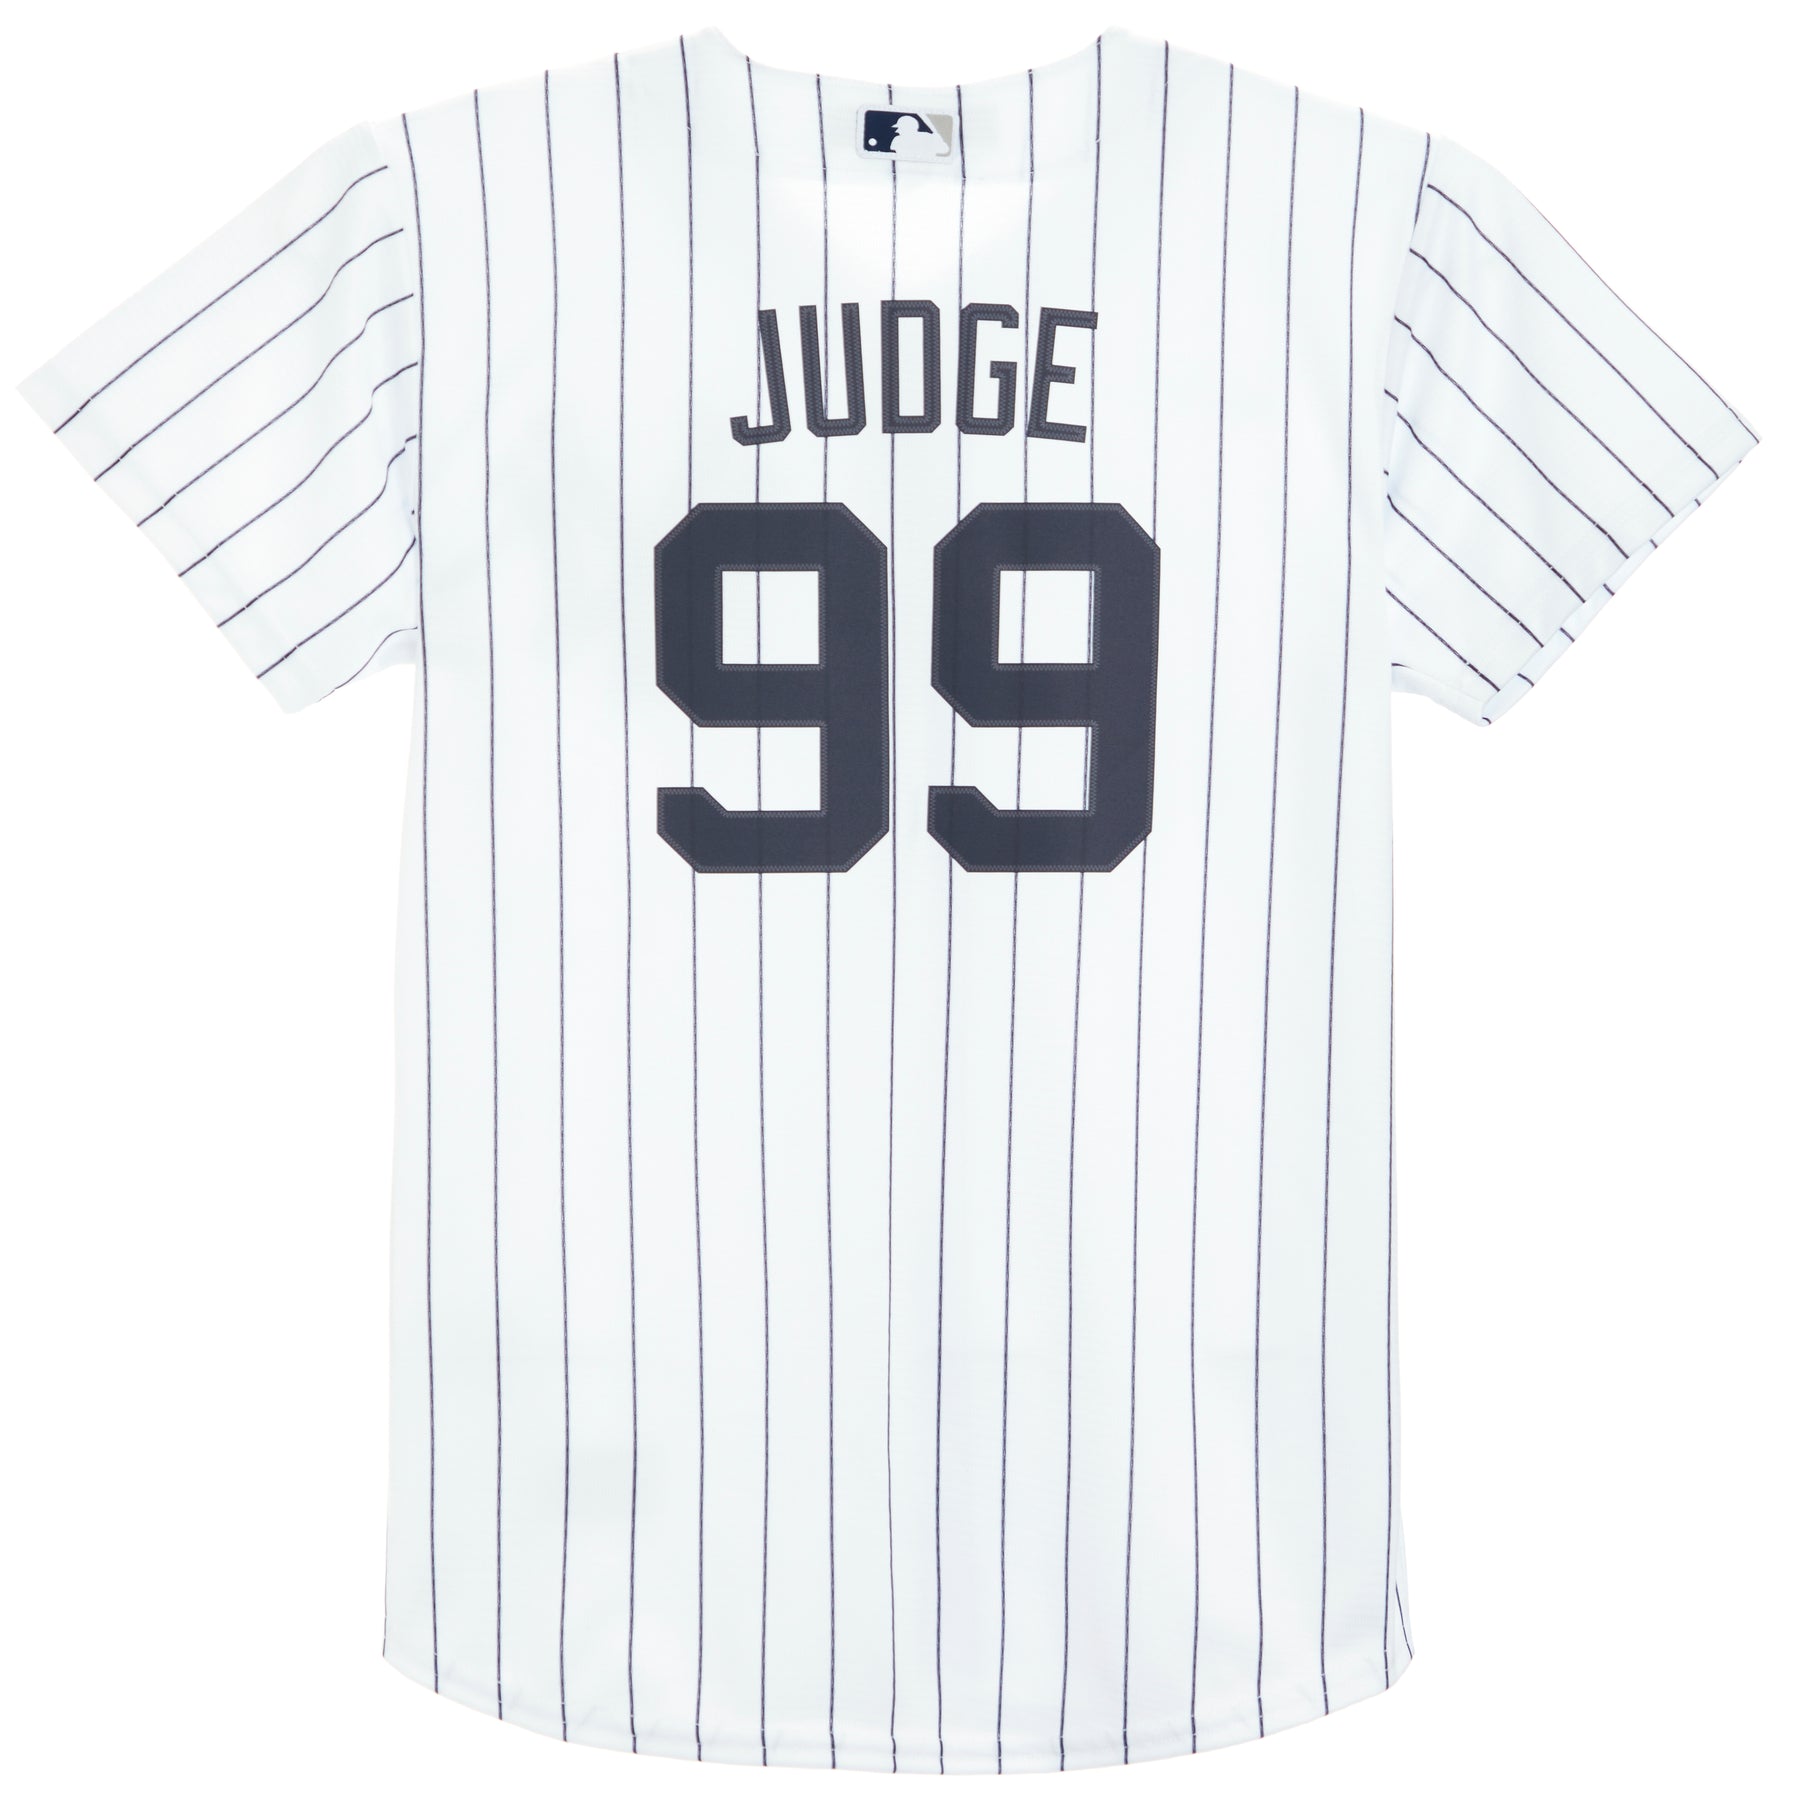 Judge/Yankees Twill Finished Home Jersey